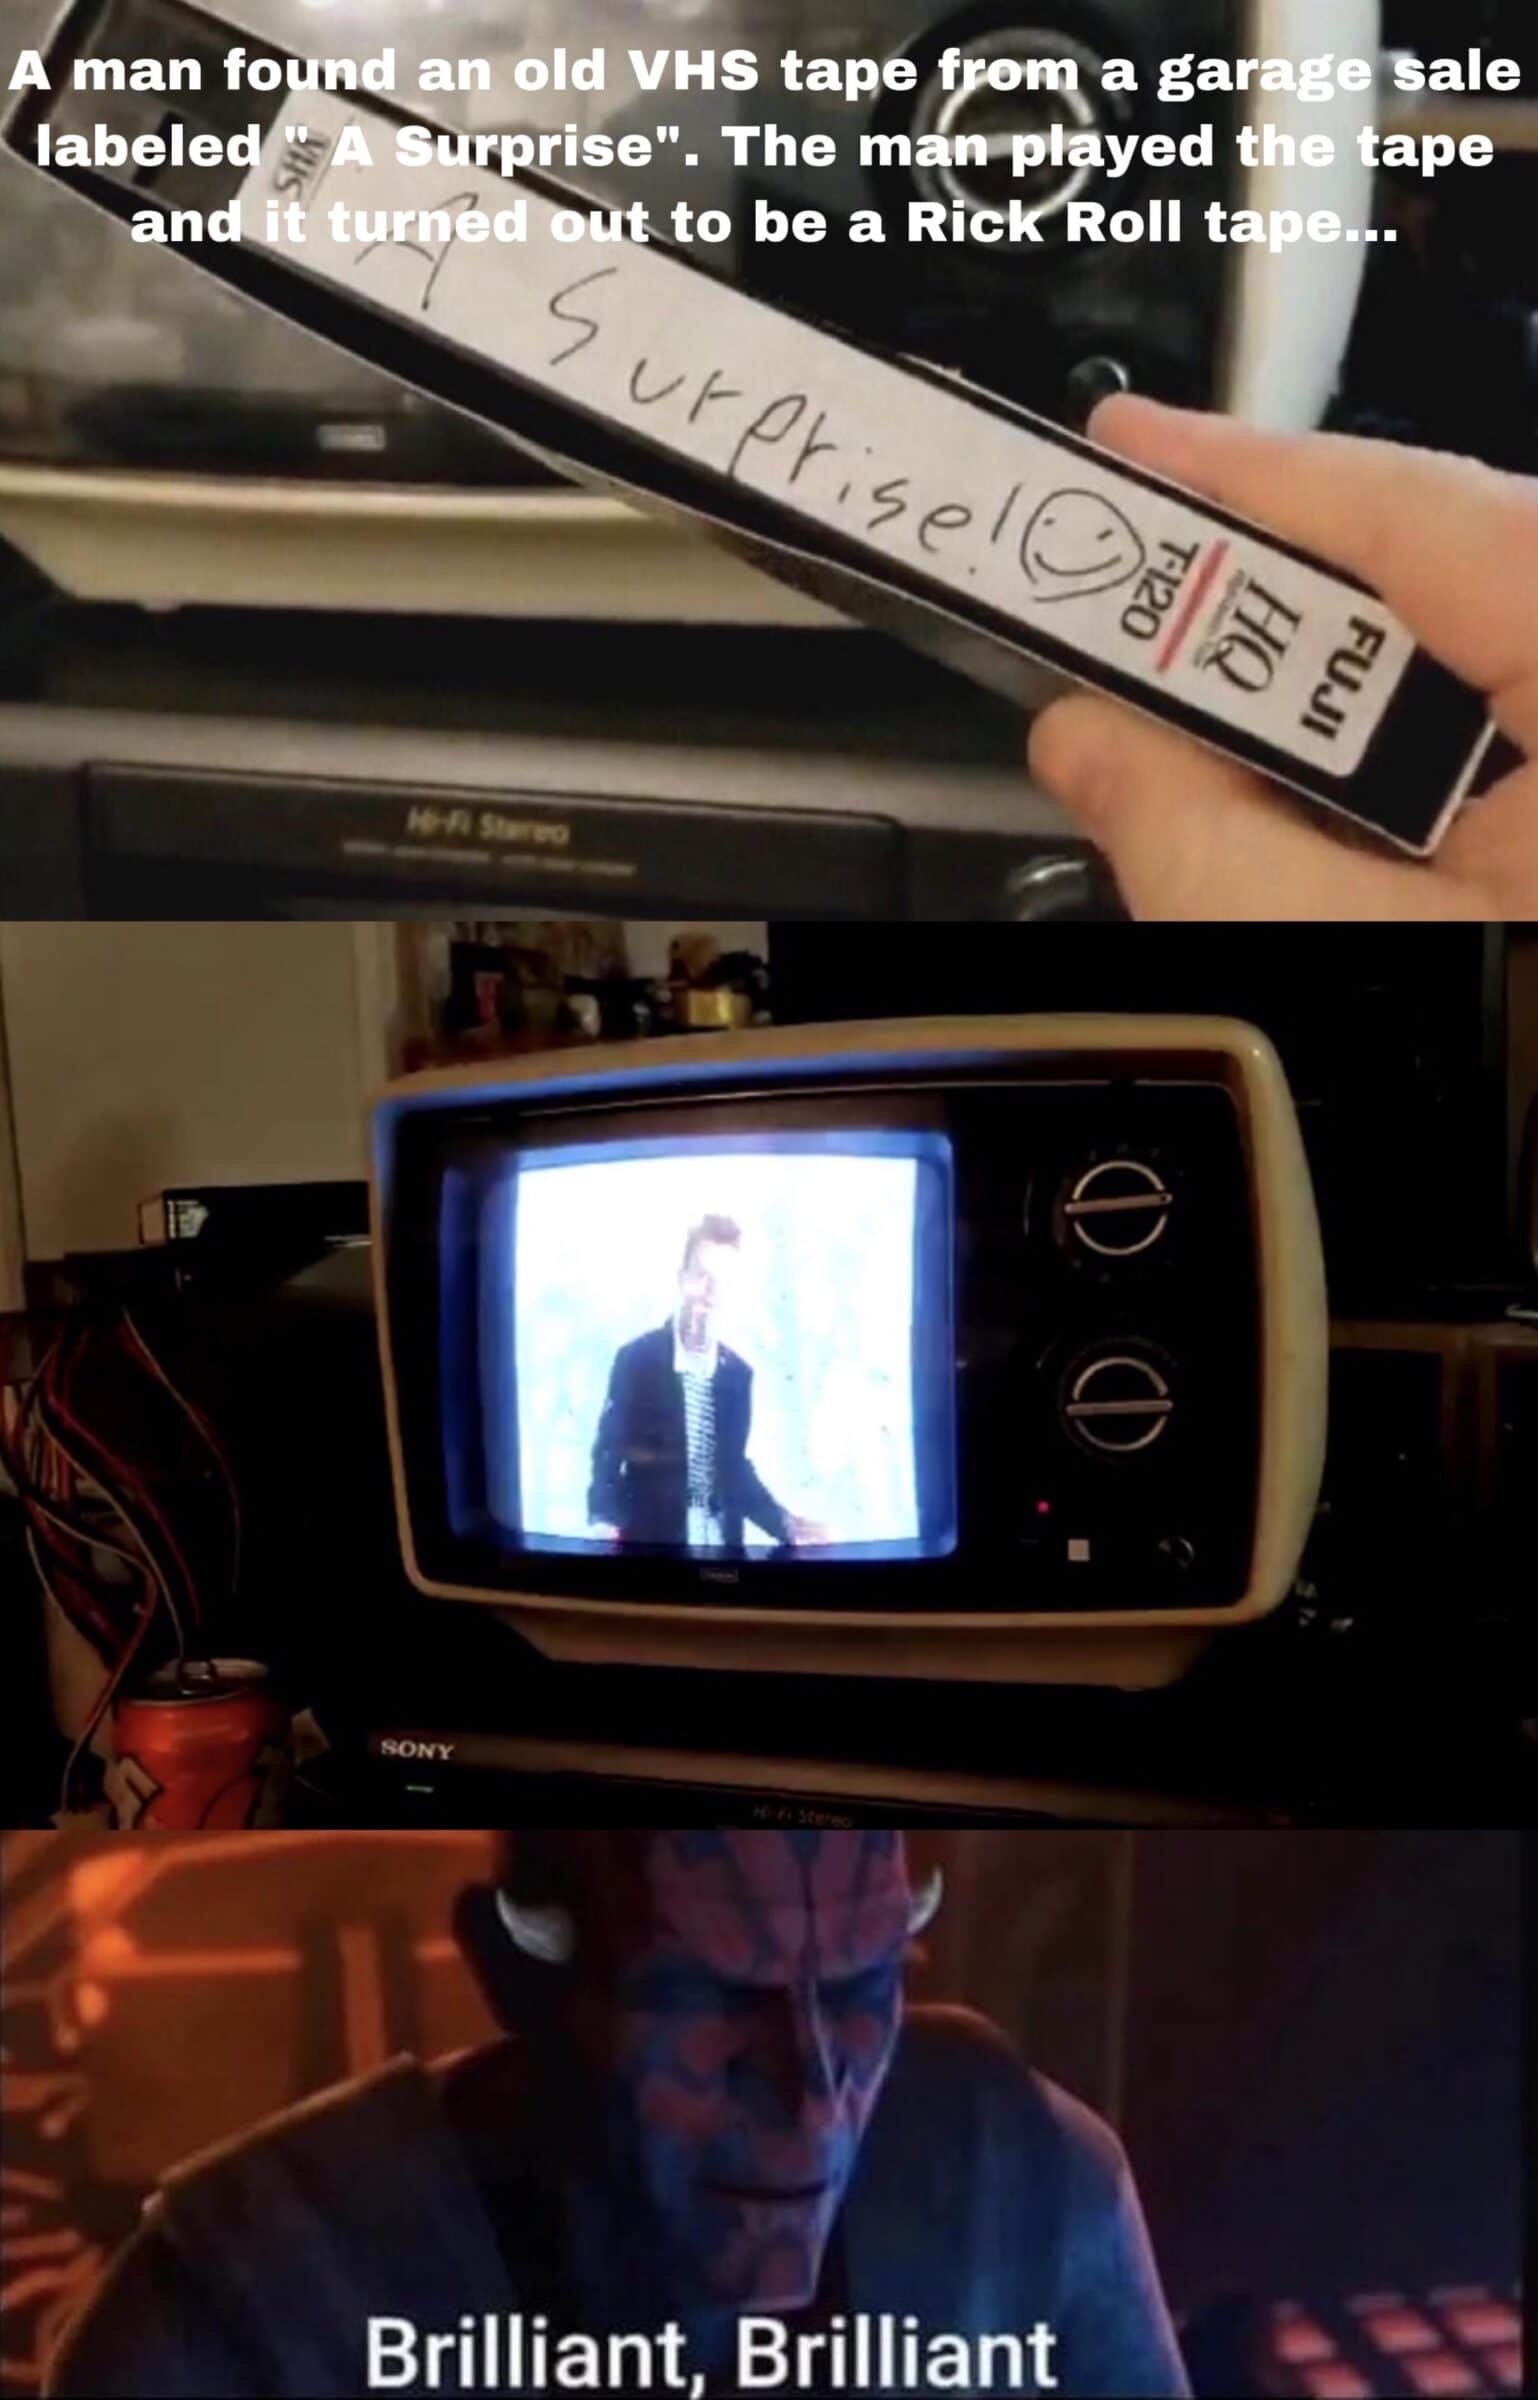 Prequel-memes, Rick Astley, WgXcQ, VHS, Rick Roll, Qw4 Star Wars Memes Prequel-memes, Rick Astley, WgXcQ, VHS, Rick Roll, Qw4 text: A man fo n an old VHS tape from a garage ±ale labele P